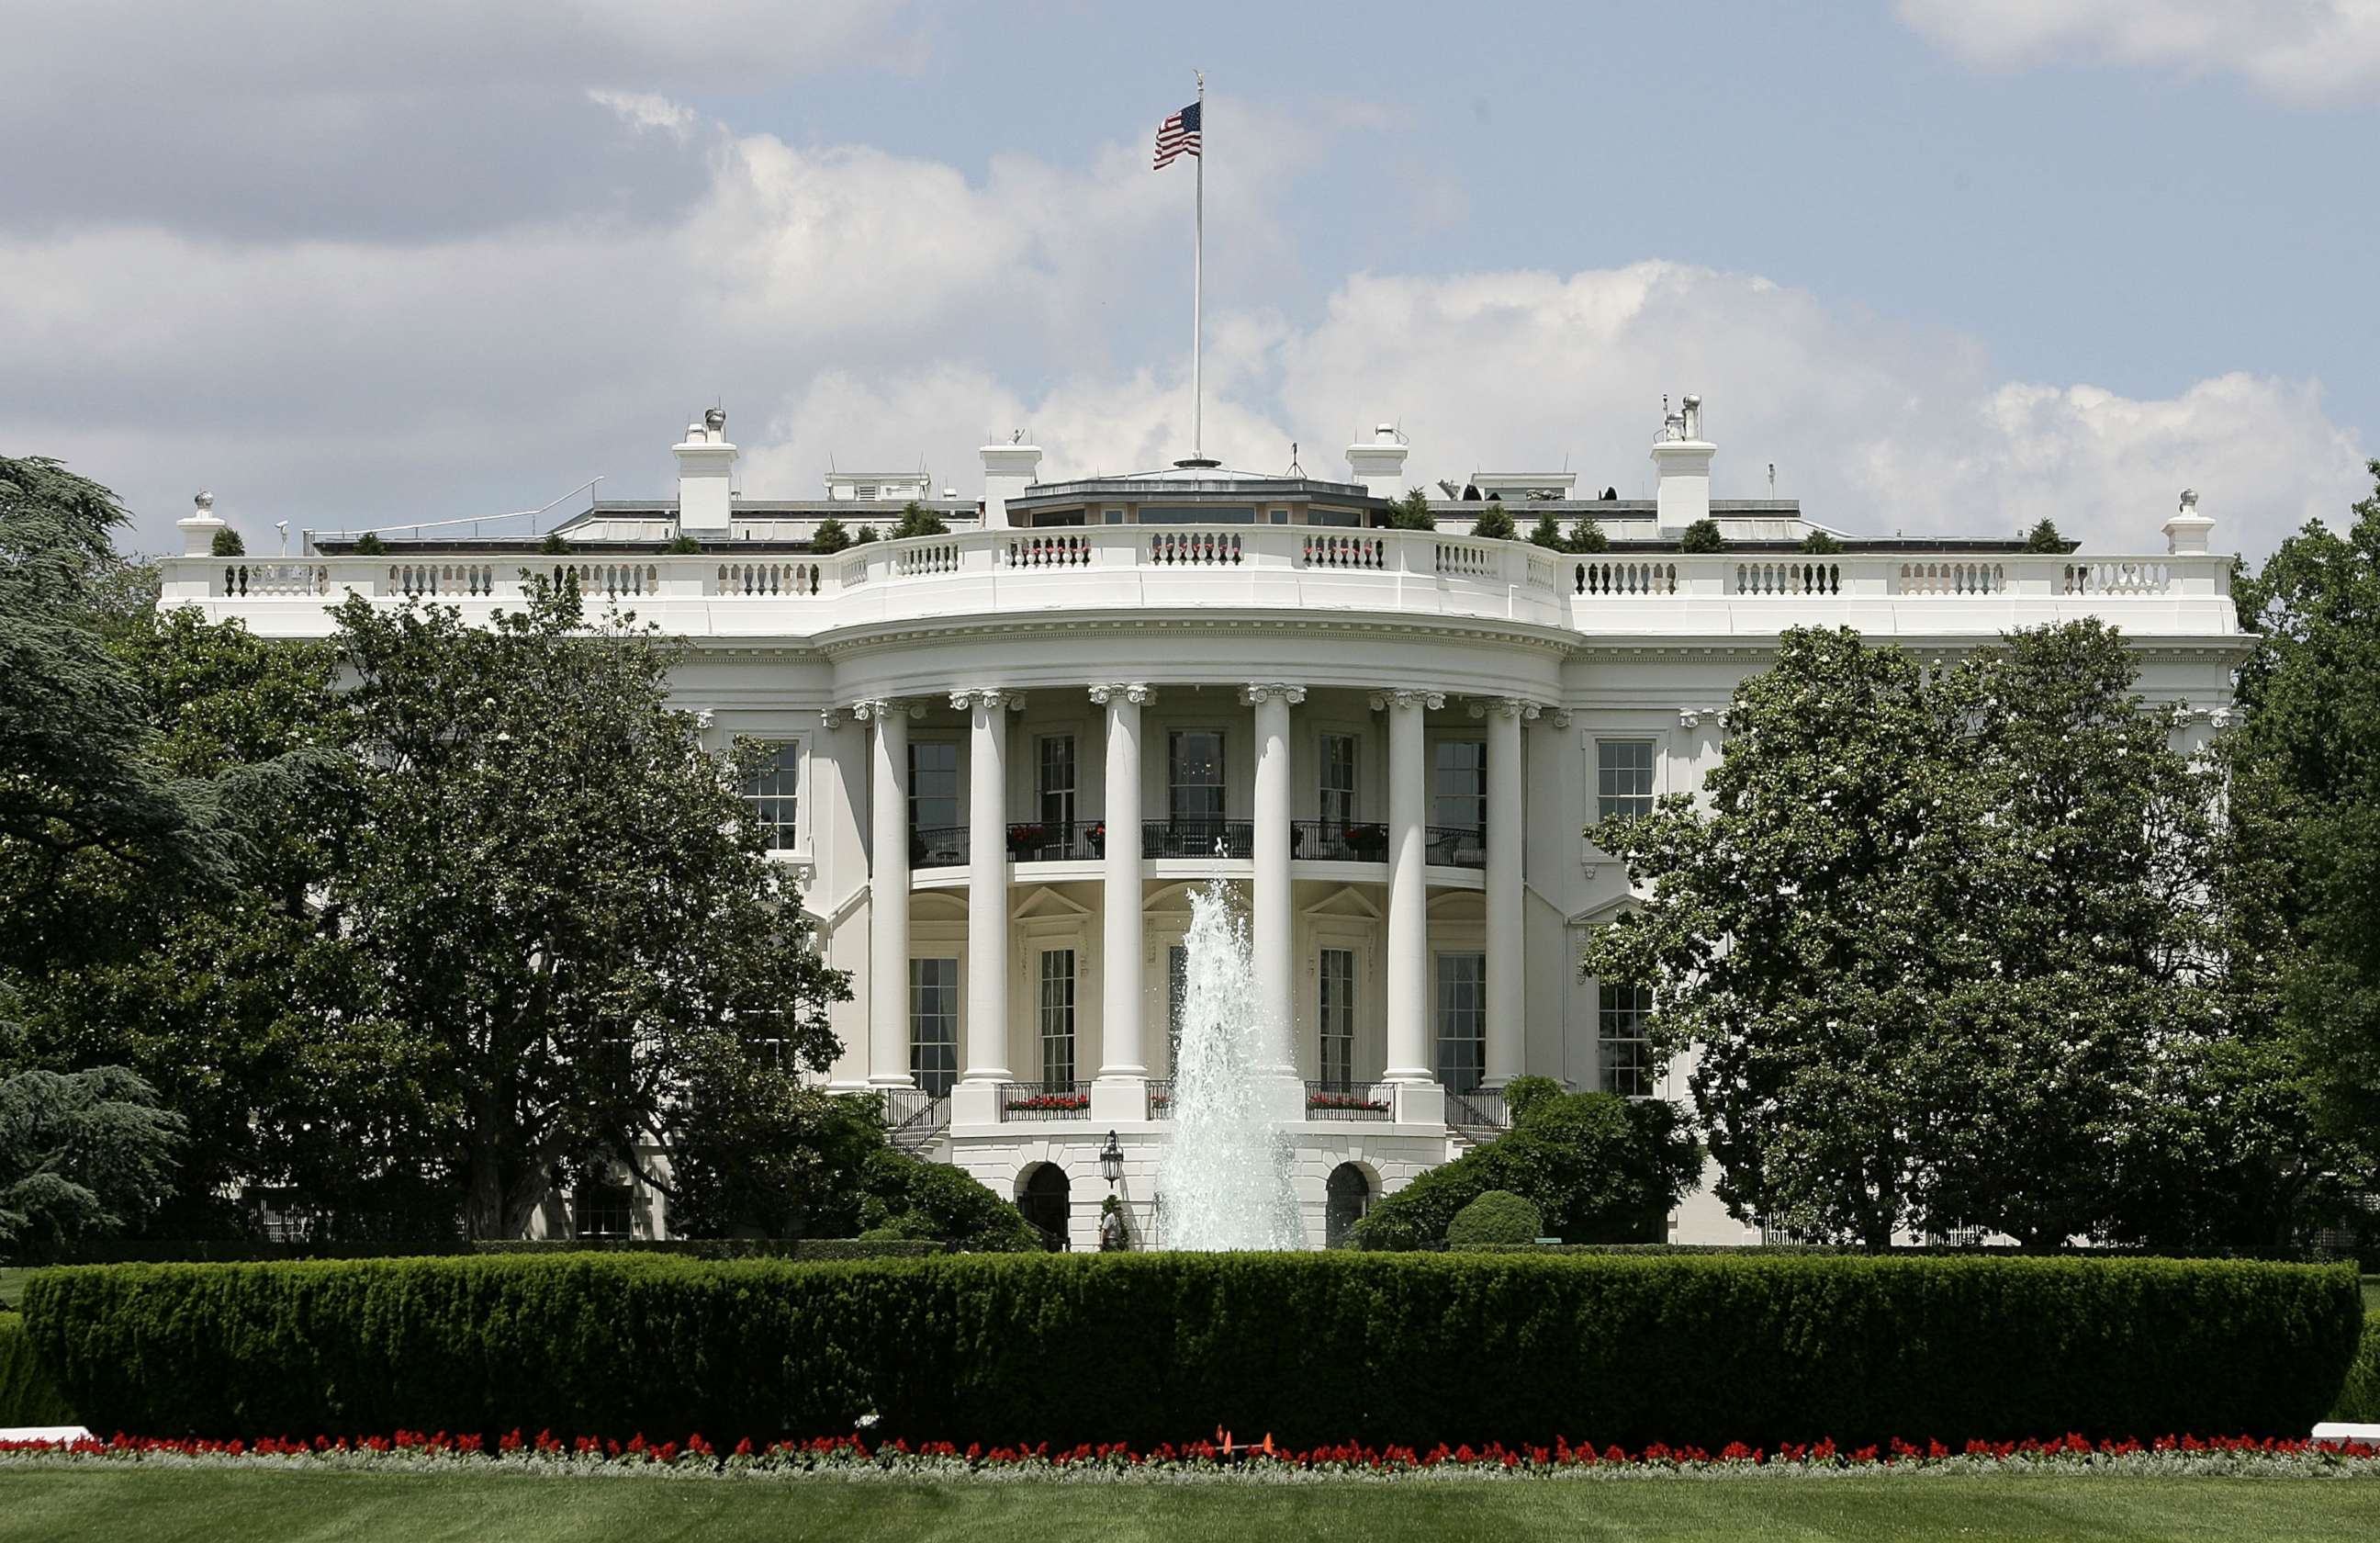 PHOTO: The exterior view of the south side of the White House in Washington.